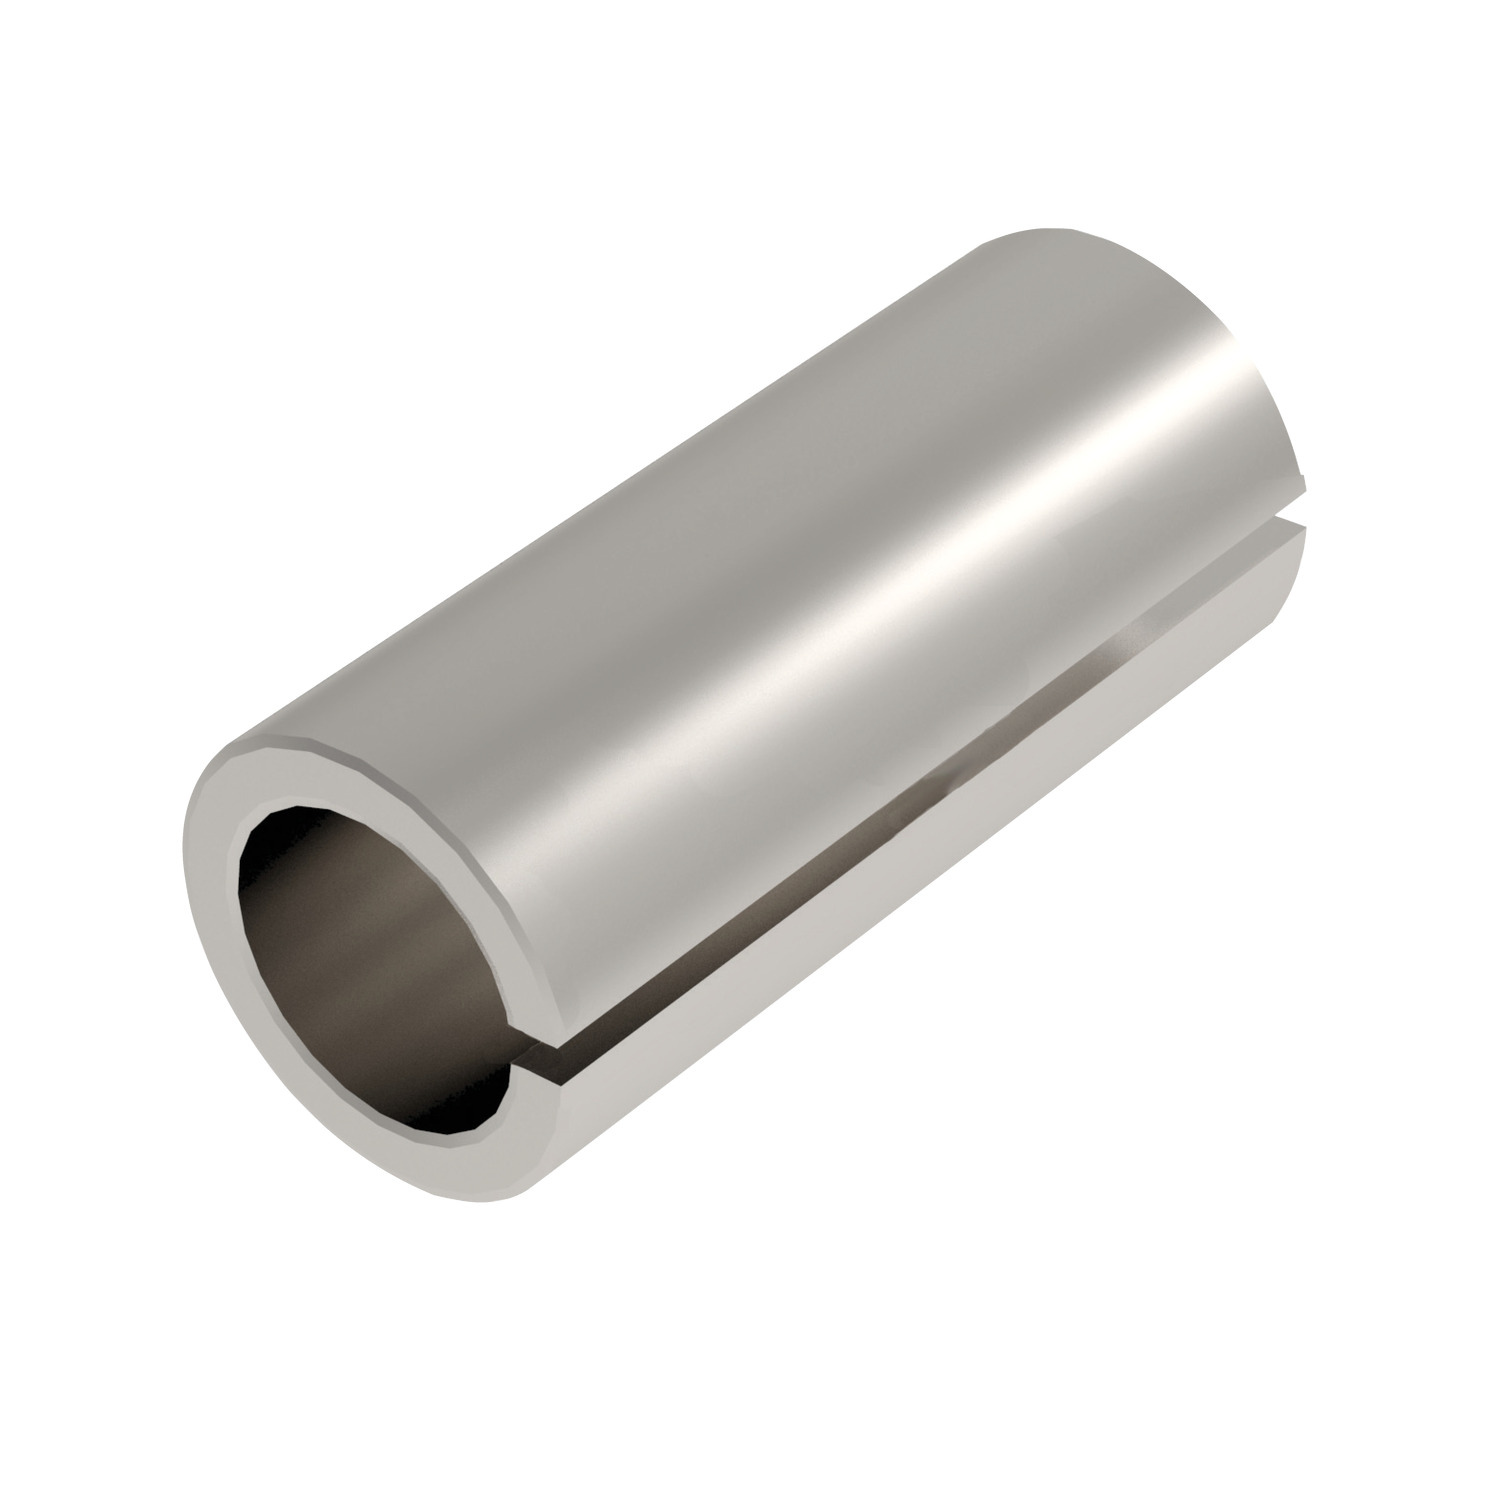 P1335 - Clearance Spacers - Steel